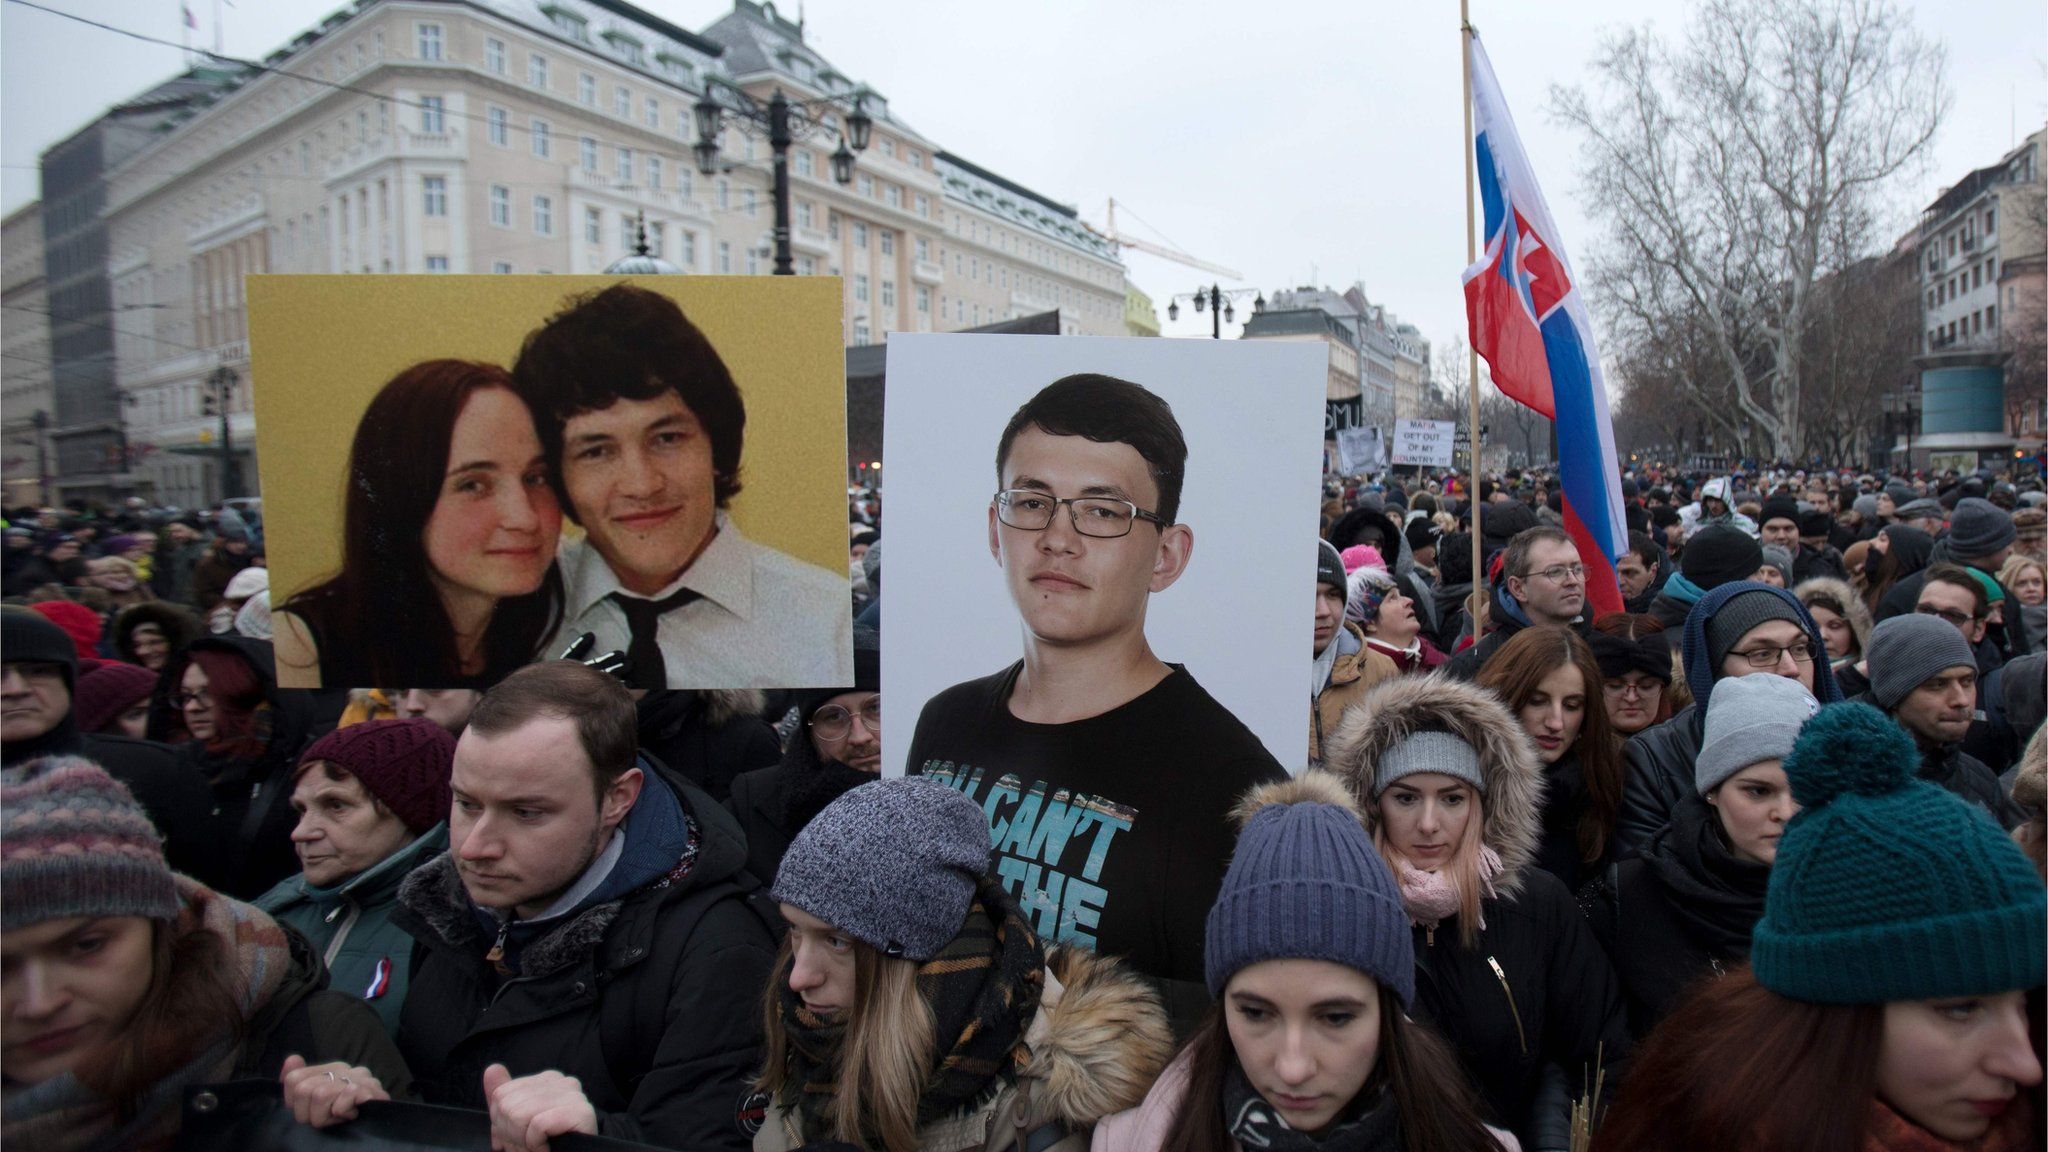 People hold portraits of murdered Slovak journalist Jan Kuciak and his girlfriend Martina Kusnirova during a silent protest march in their memory on March 2, 2018 in Bratislava, Slovakia